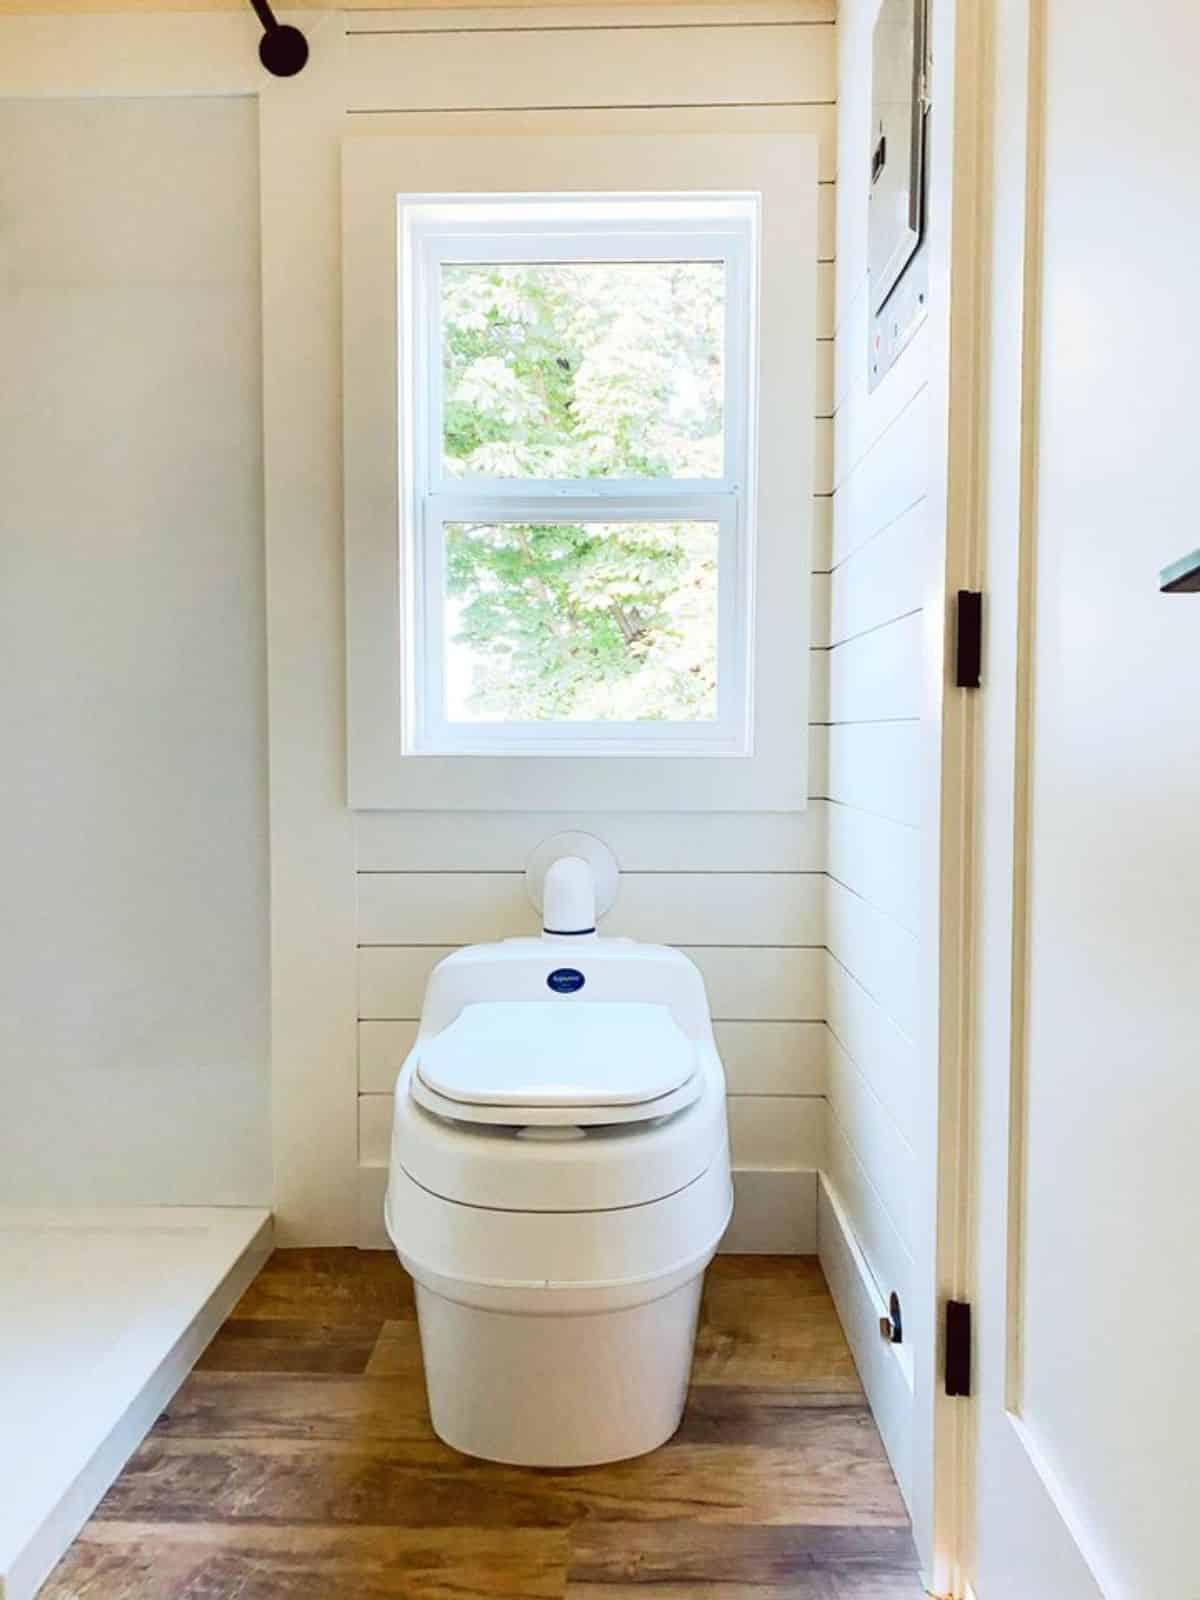 standard toilet in the bathroom of 26' minimalistic tiny home